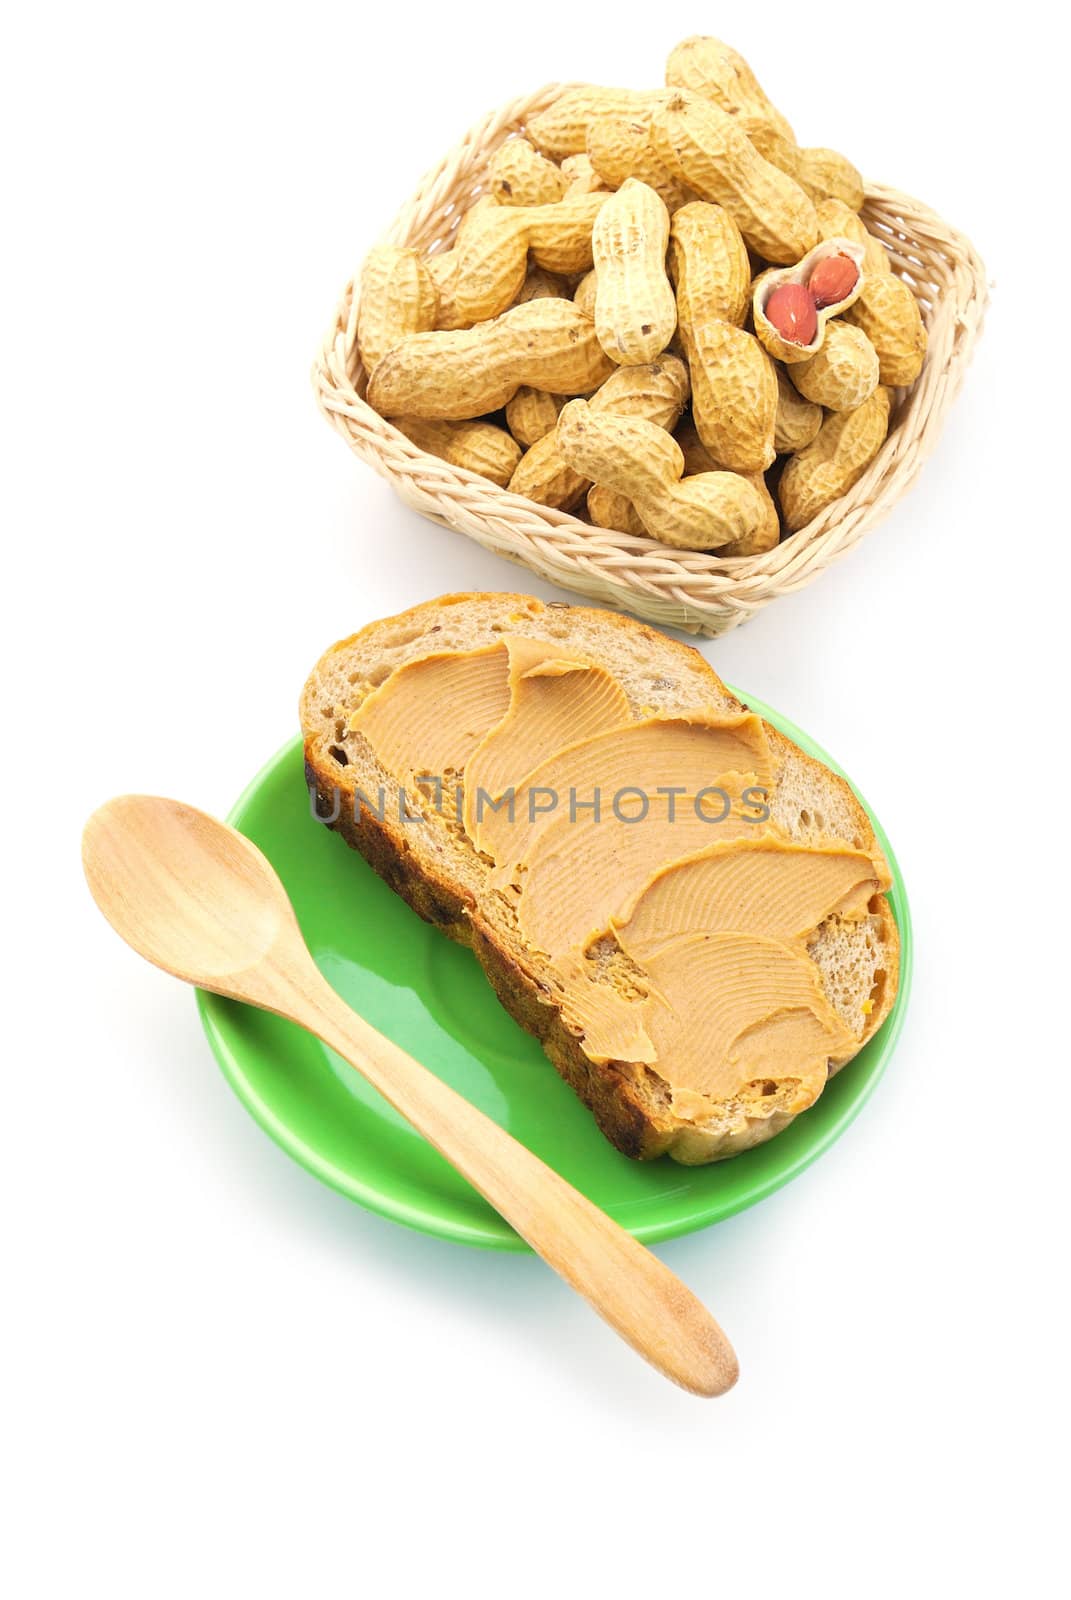 Peanut butter with bread by teen00000